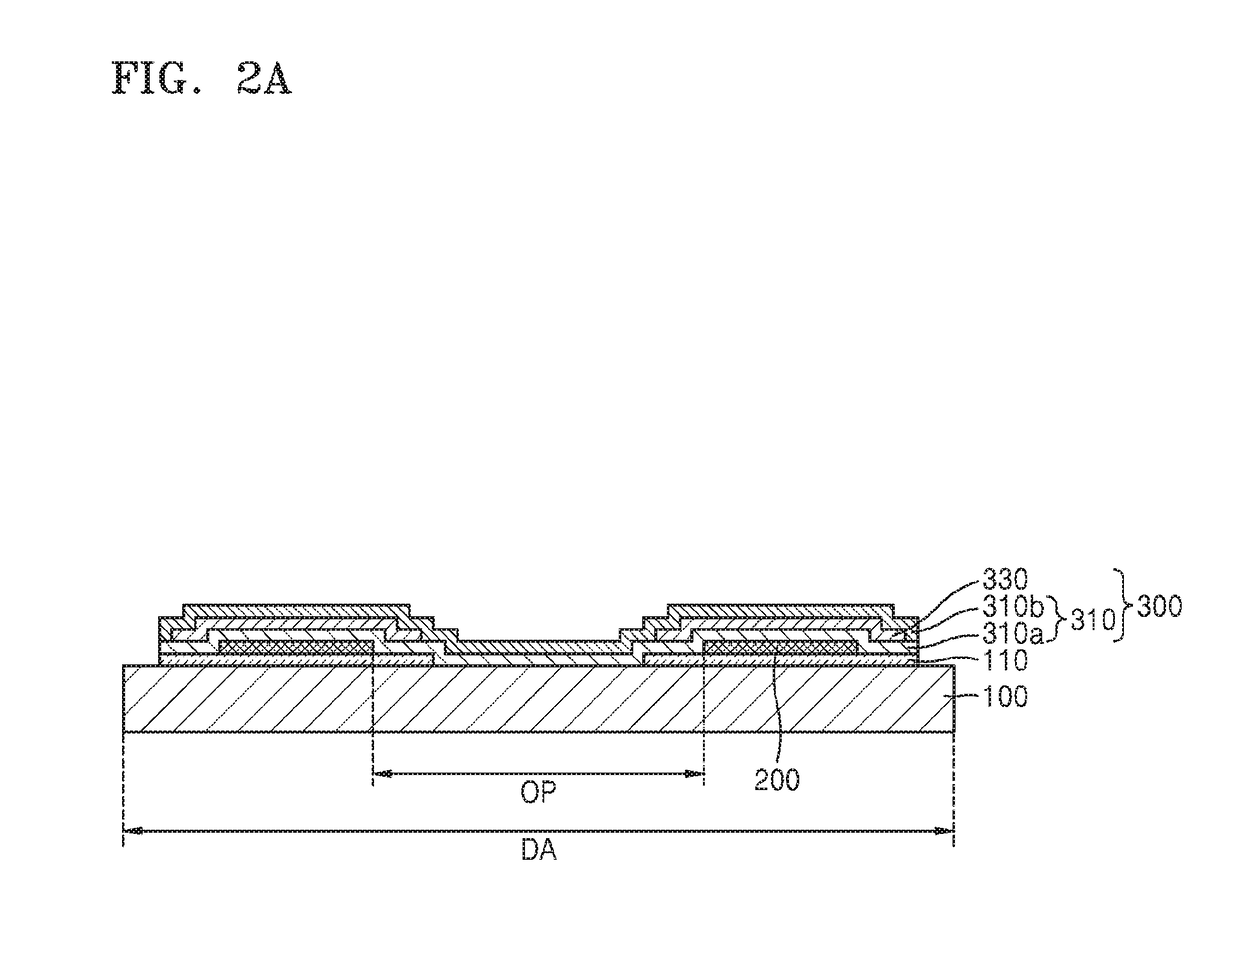 Display apparatus with substrate hole, and method of manufacturing the same